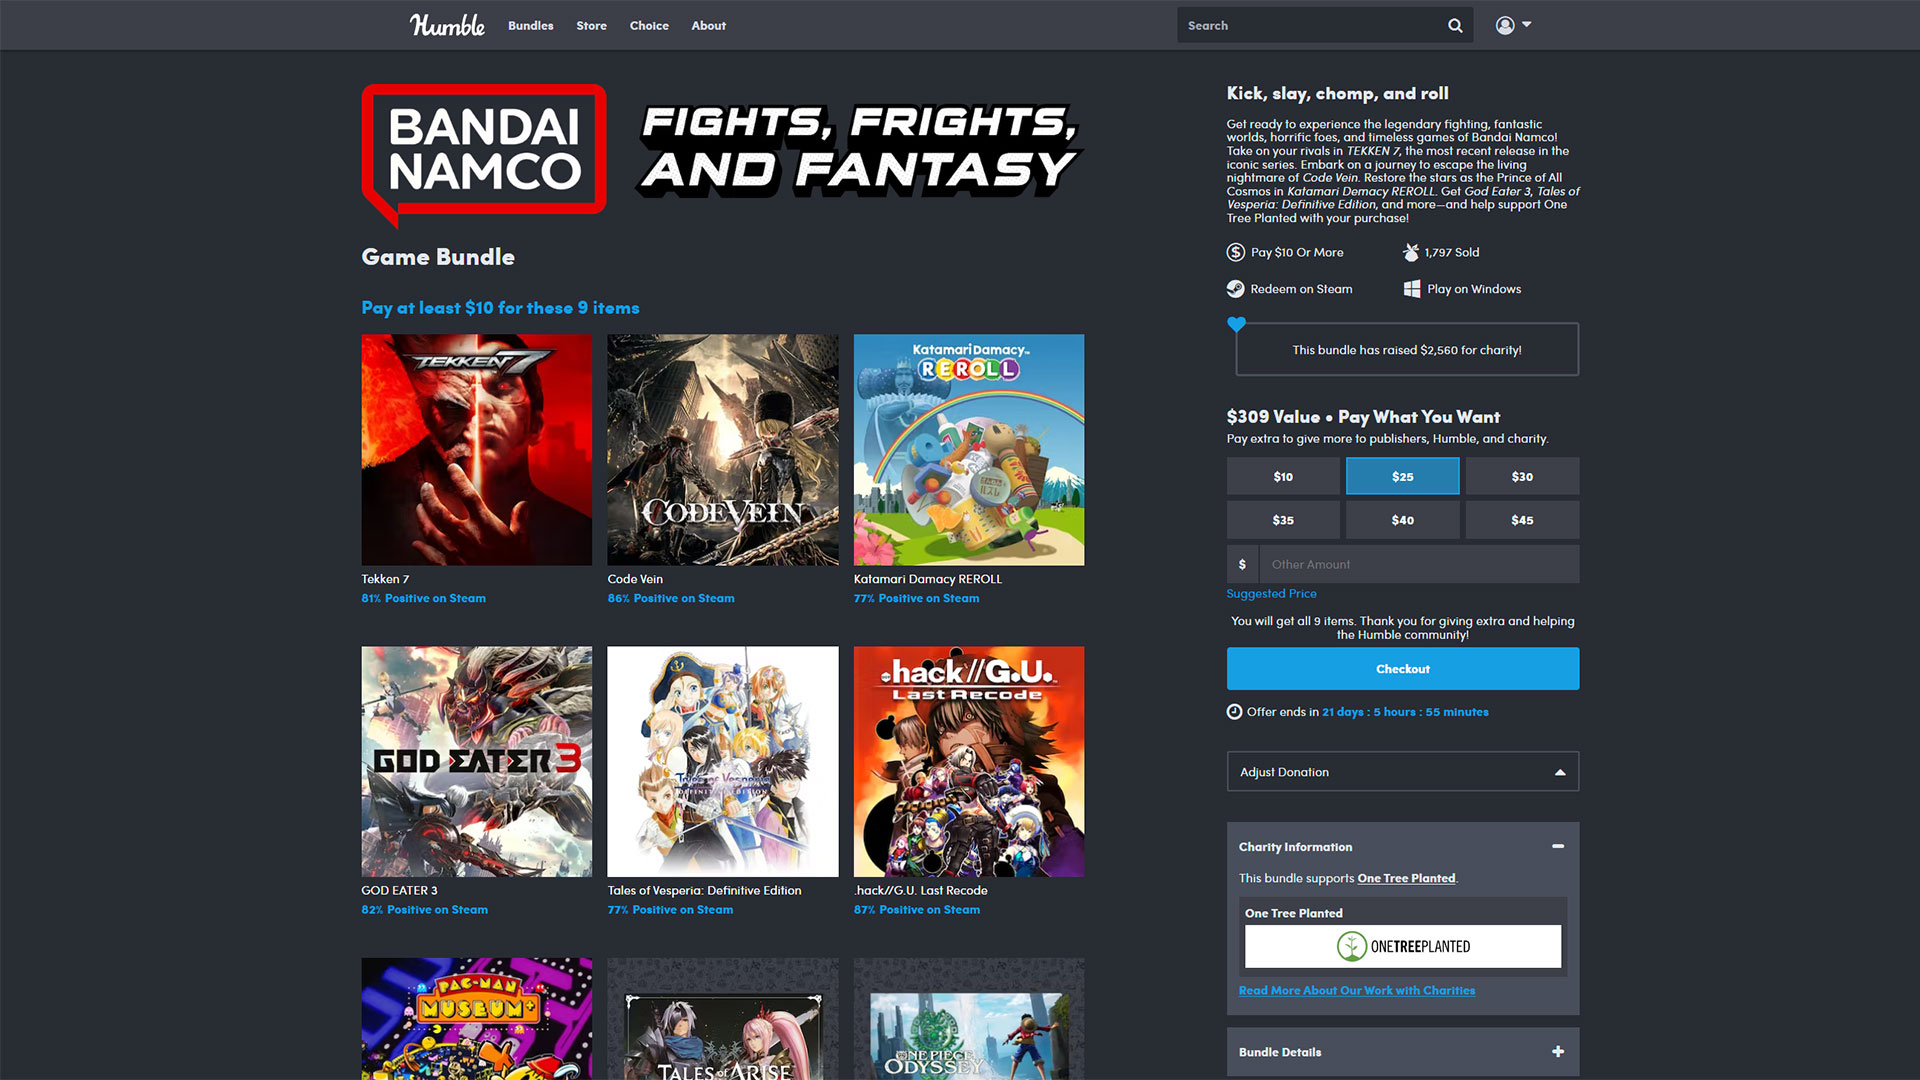 The Bandai Namco Humble Bundle gets you seven games and two coupon for $10